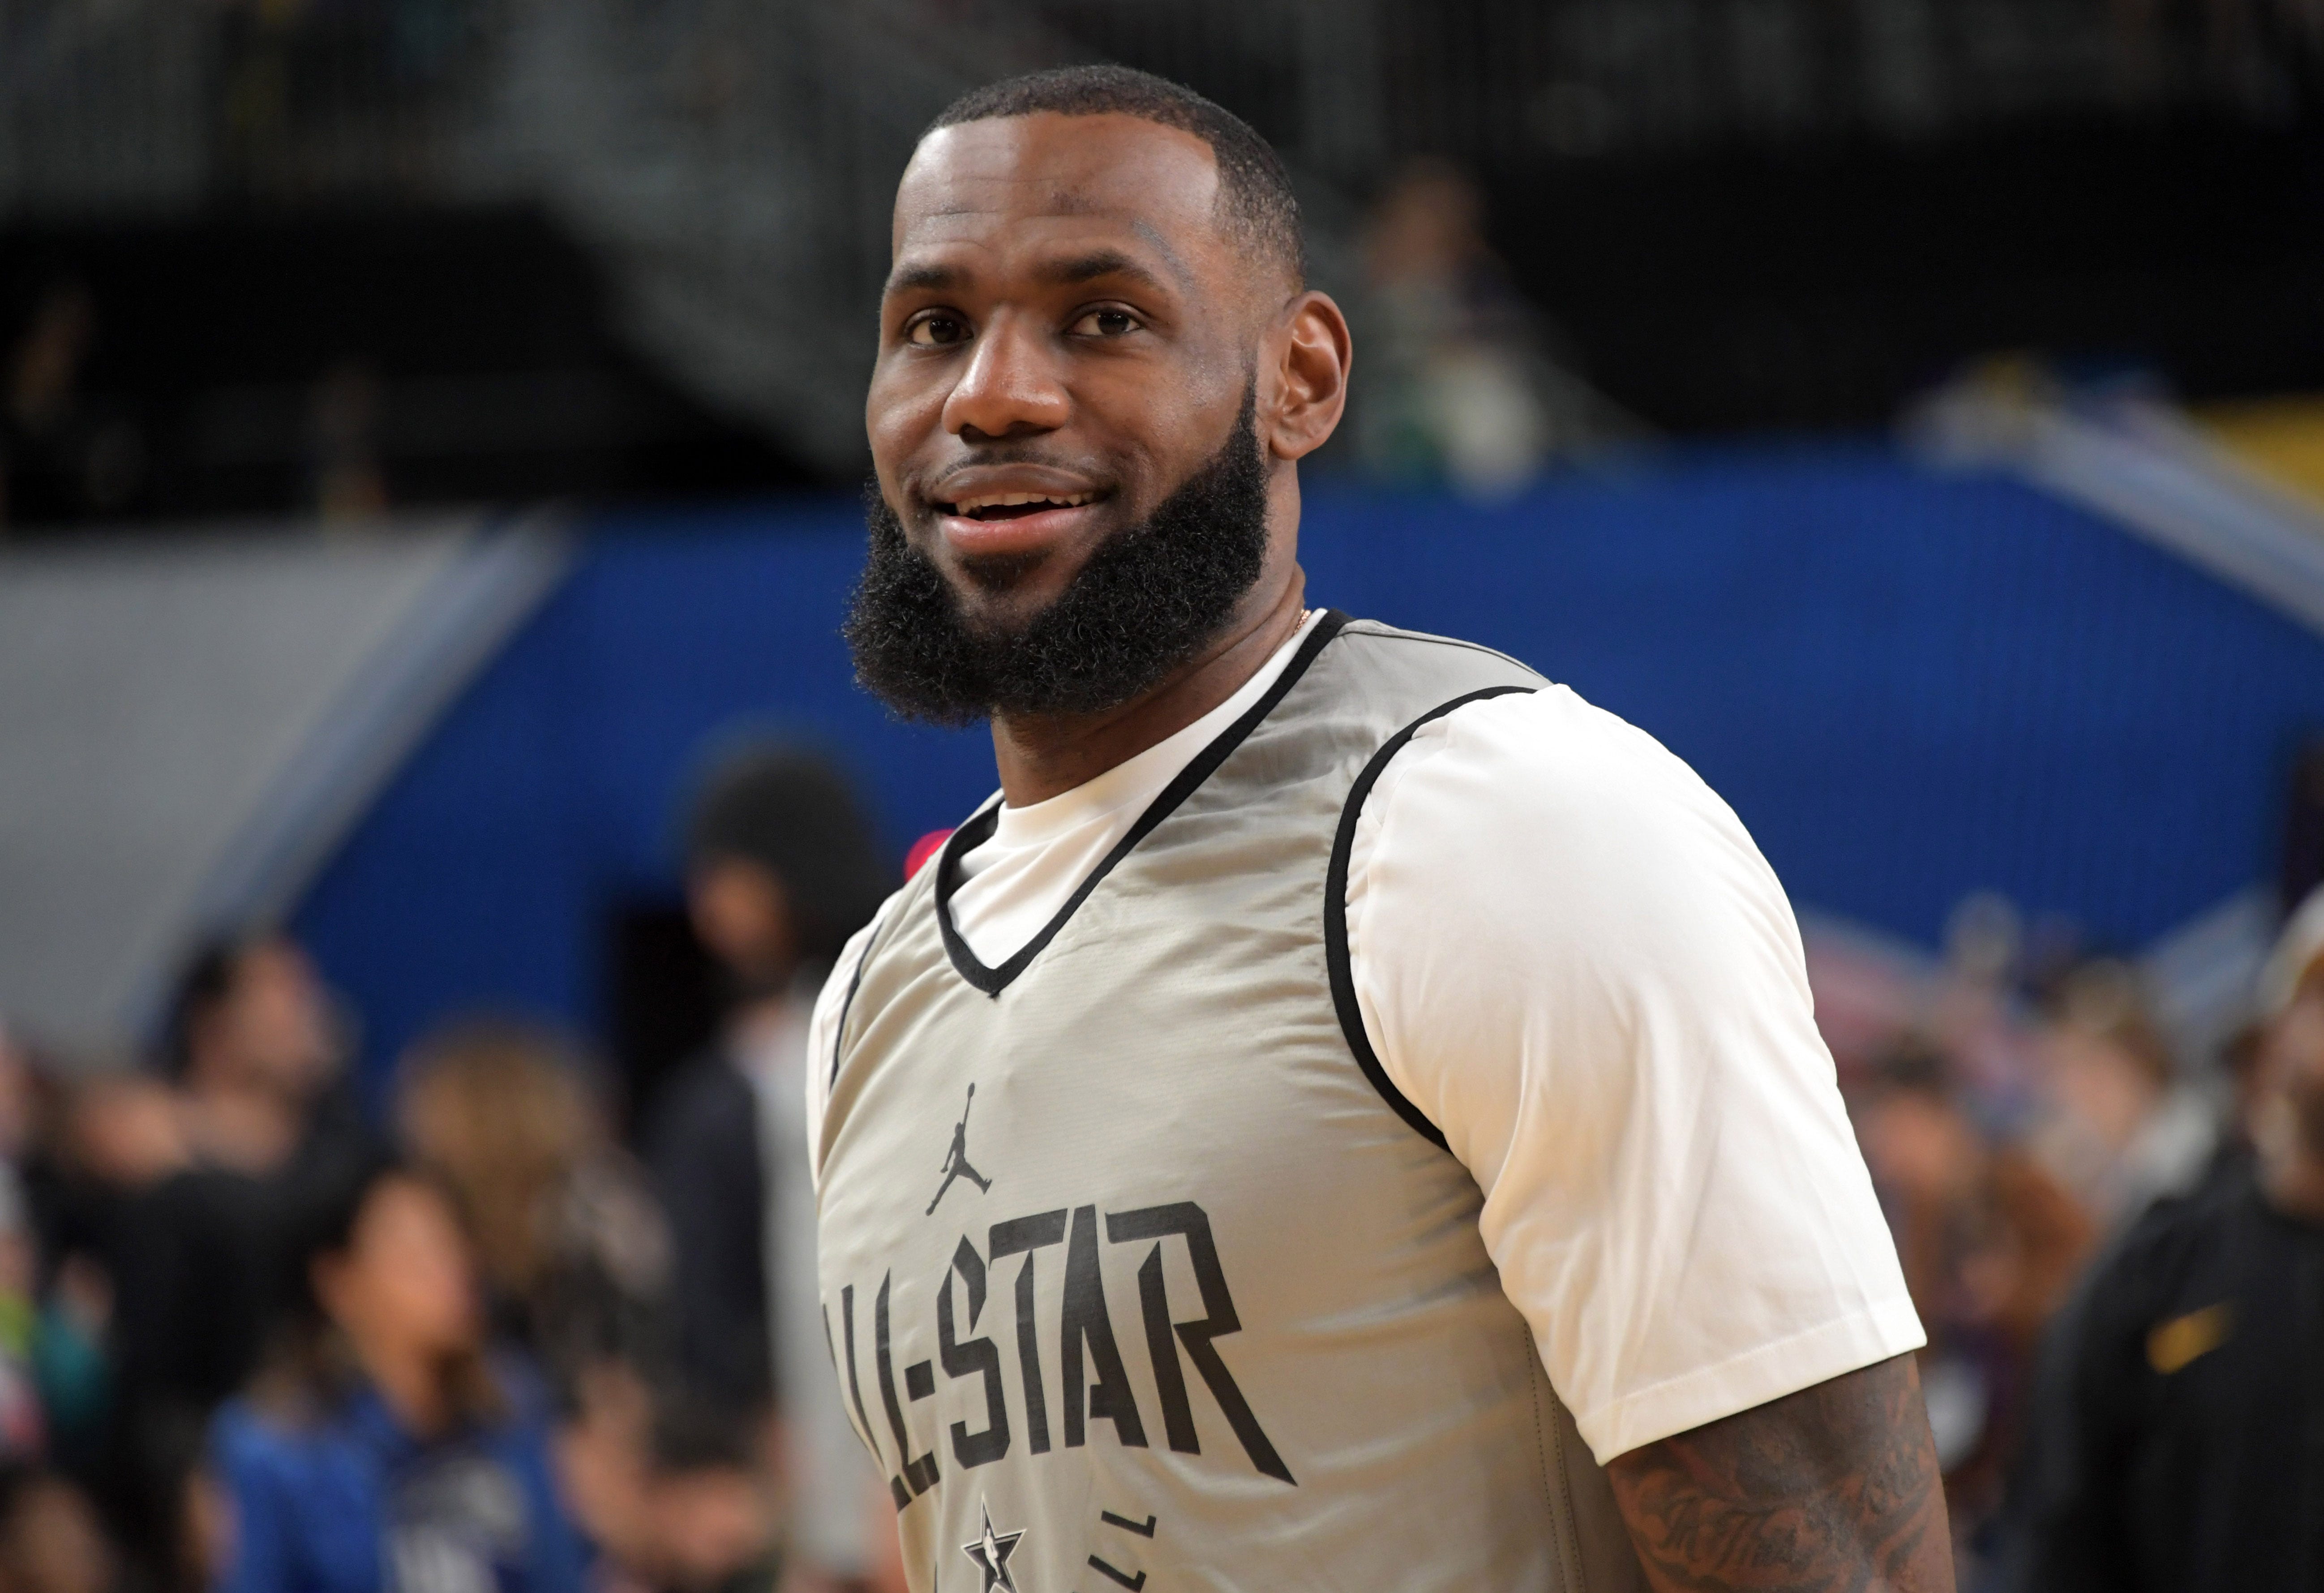 LeBron James to Fox News host: 'We will 